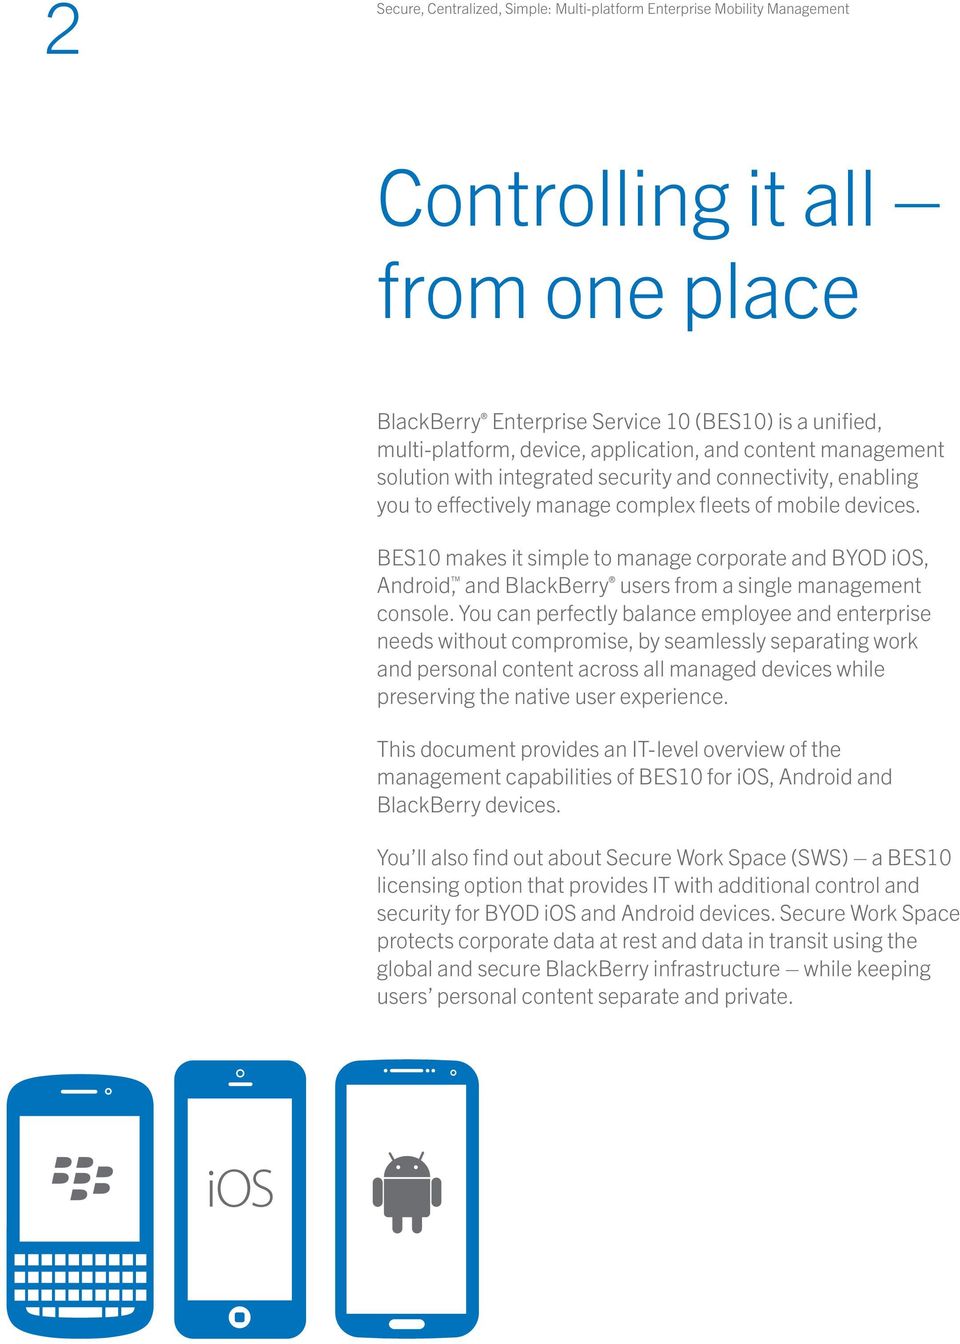 BES10 makes it simple to manage corporate and BYOD ios, Android, and BlackBerry users from a single management console.